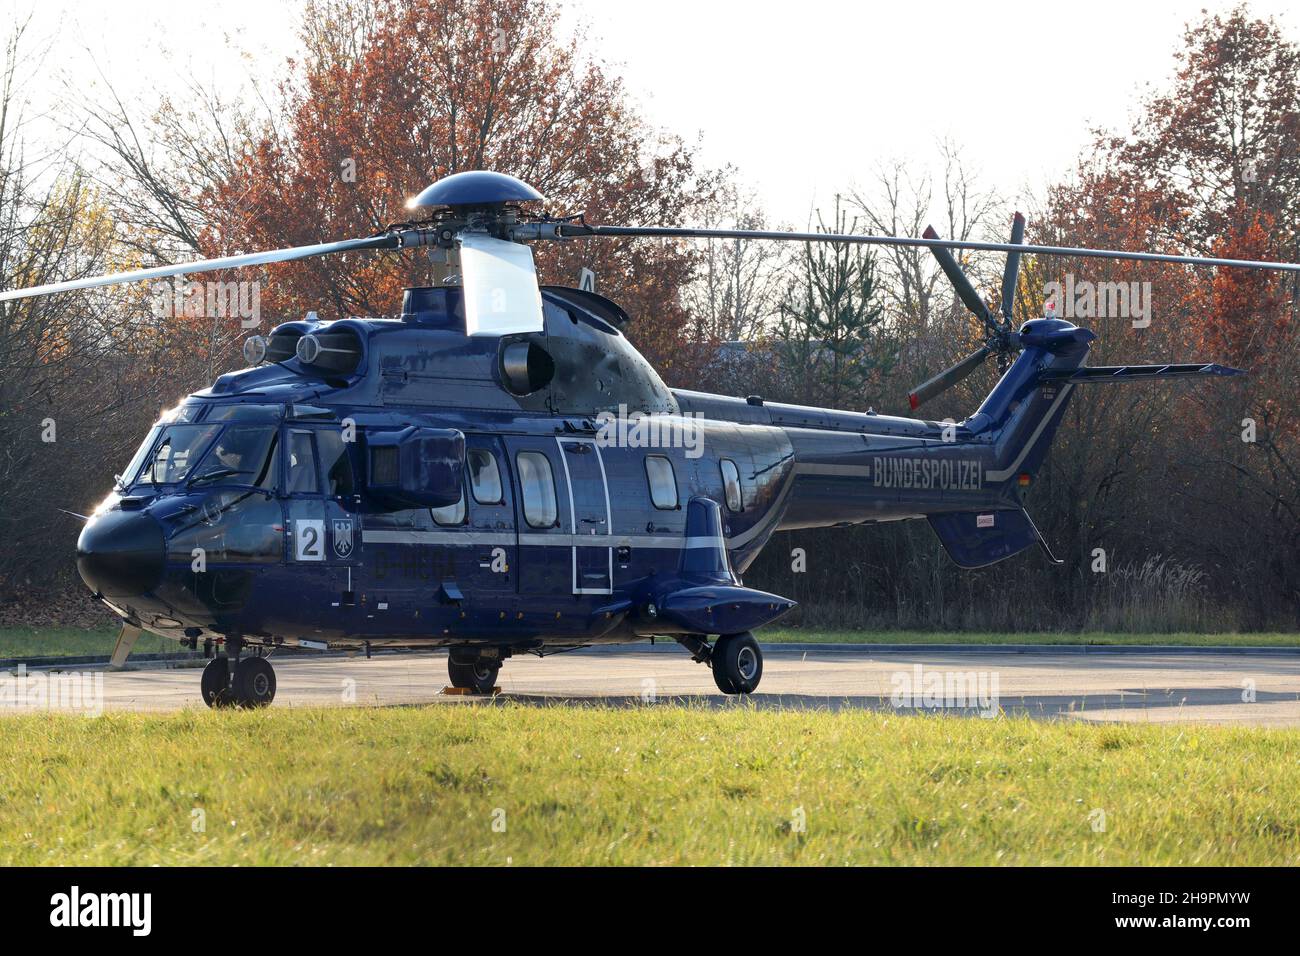 German Federal Police Helicopter Stock Photo